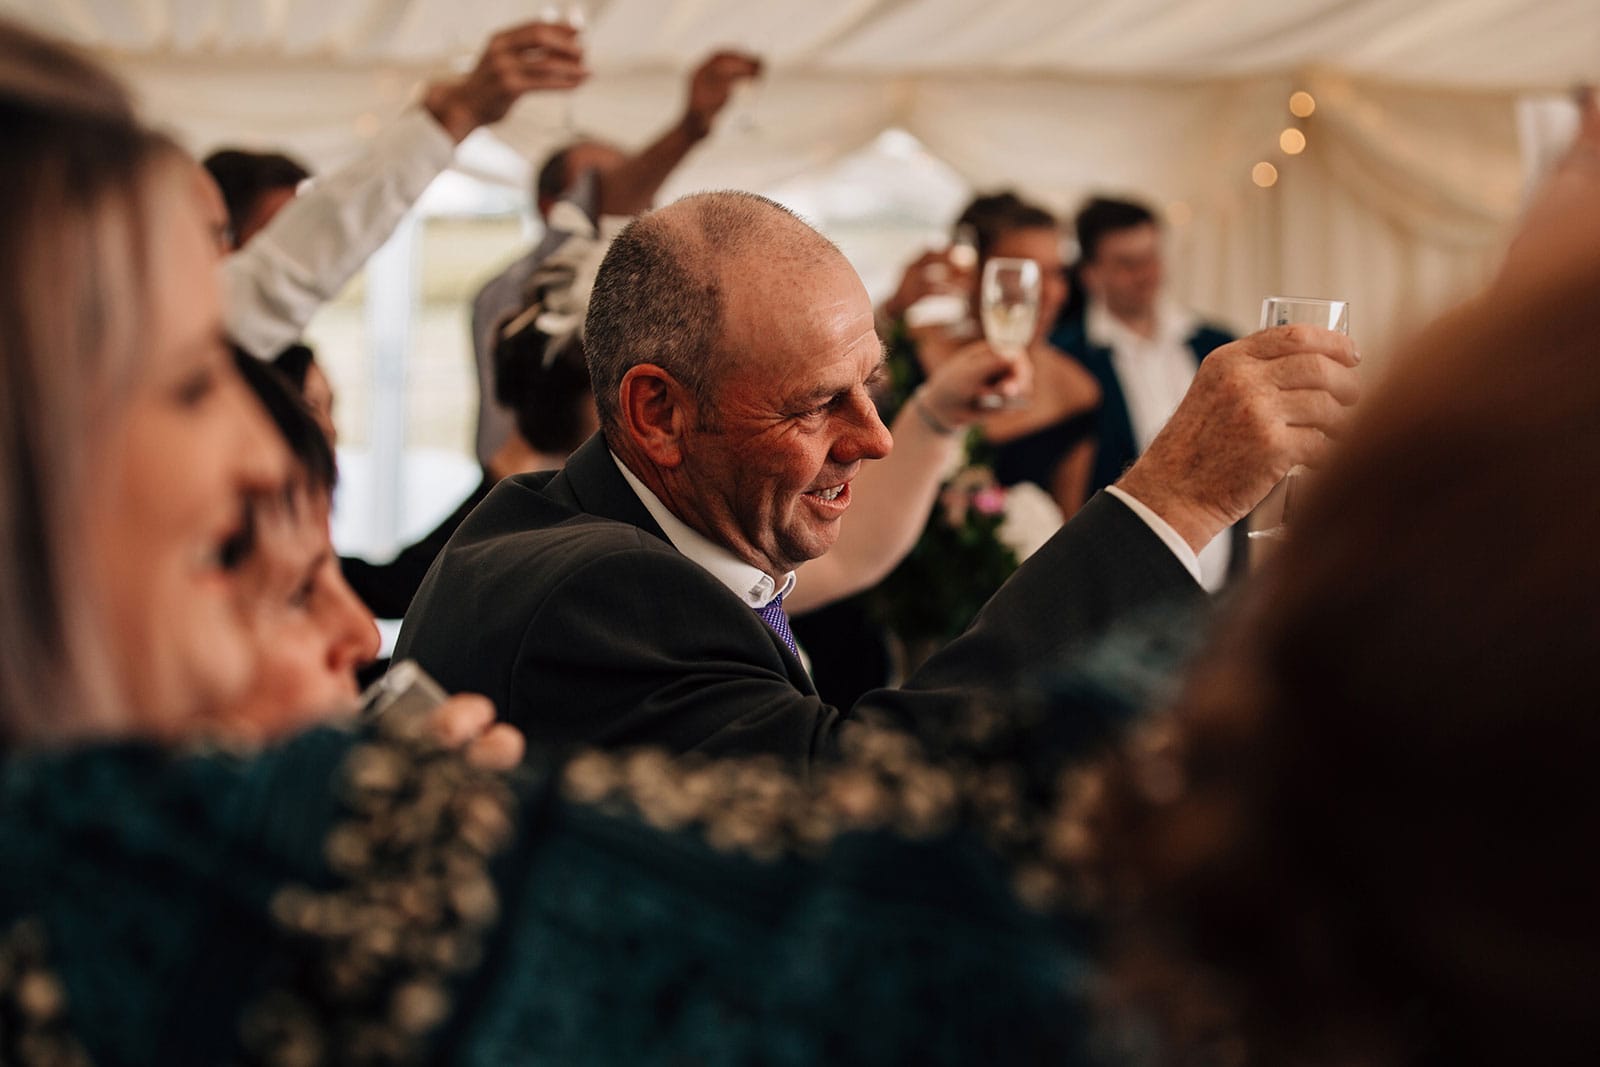 Yorkshire photographer our approach to wedding speeches